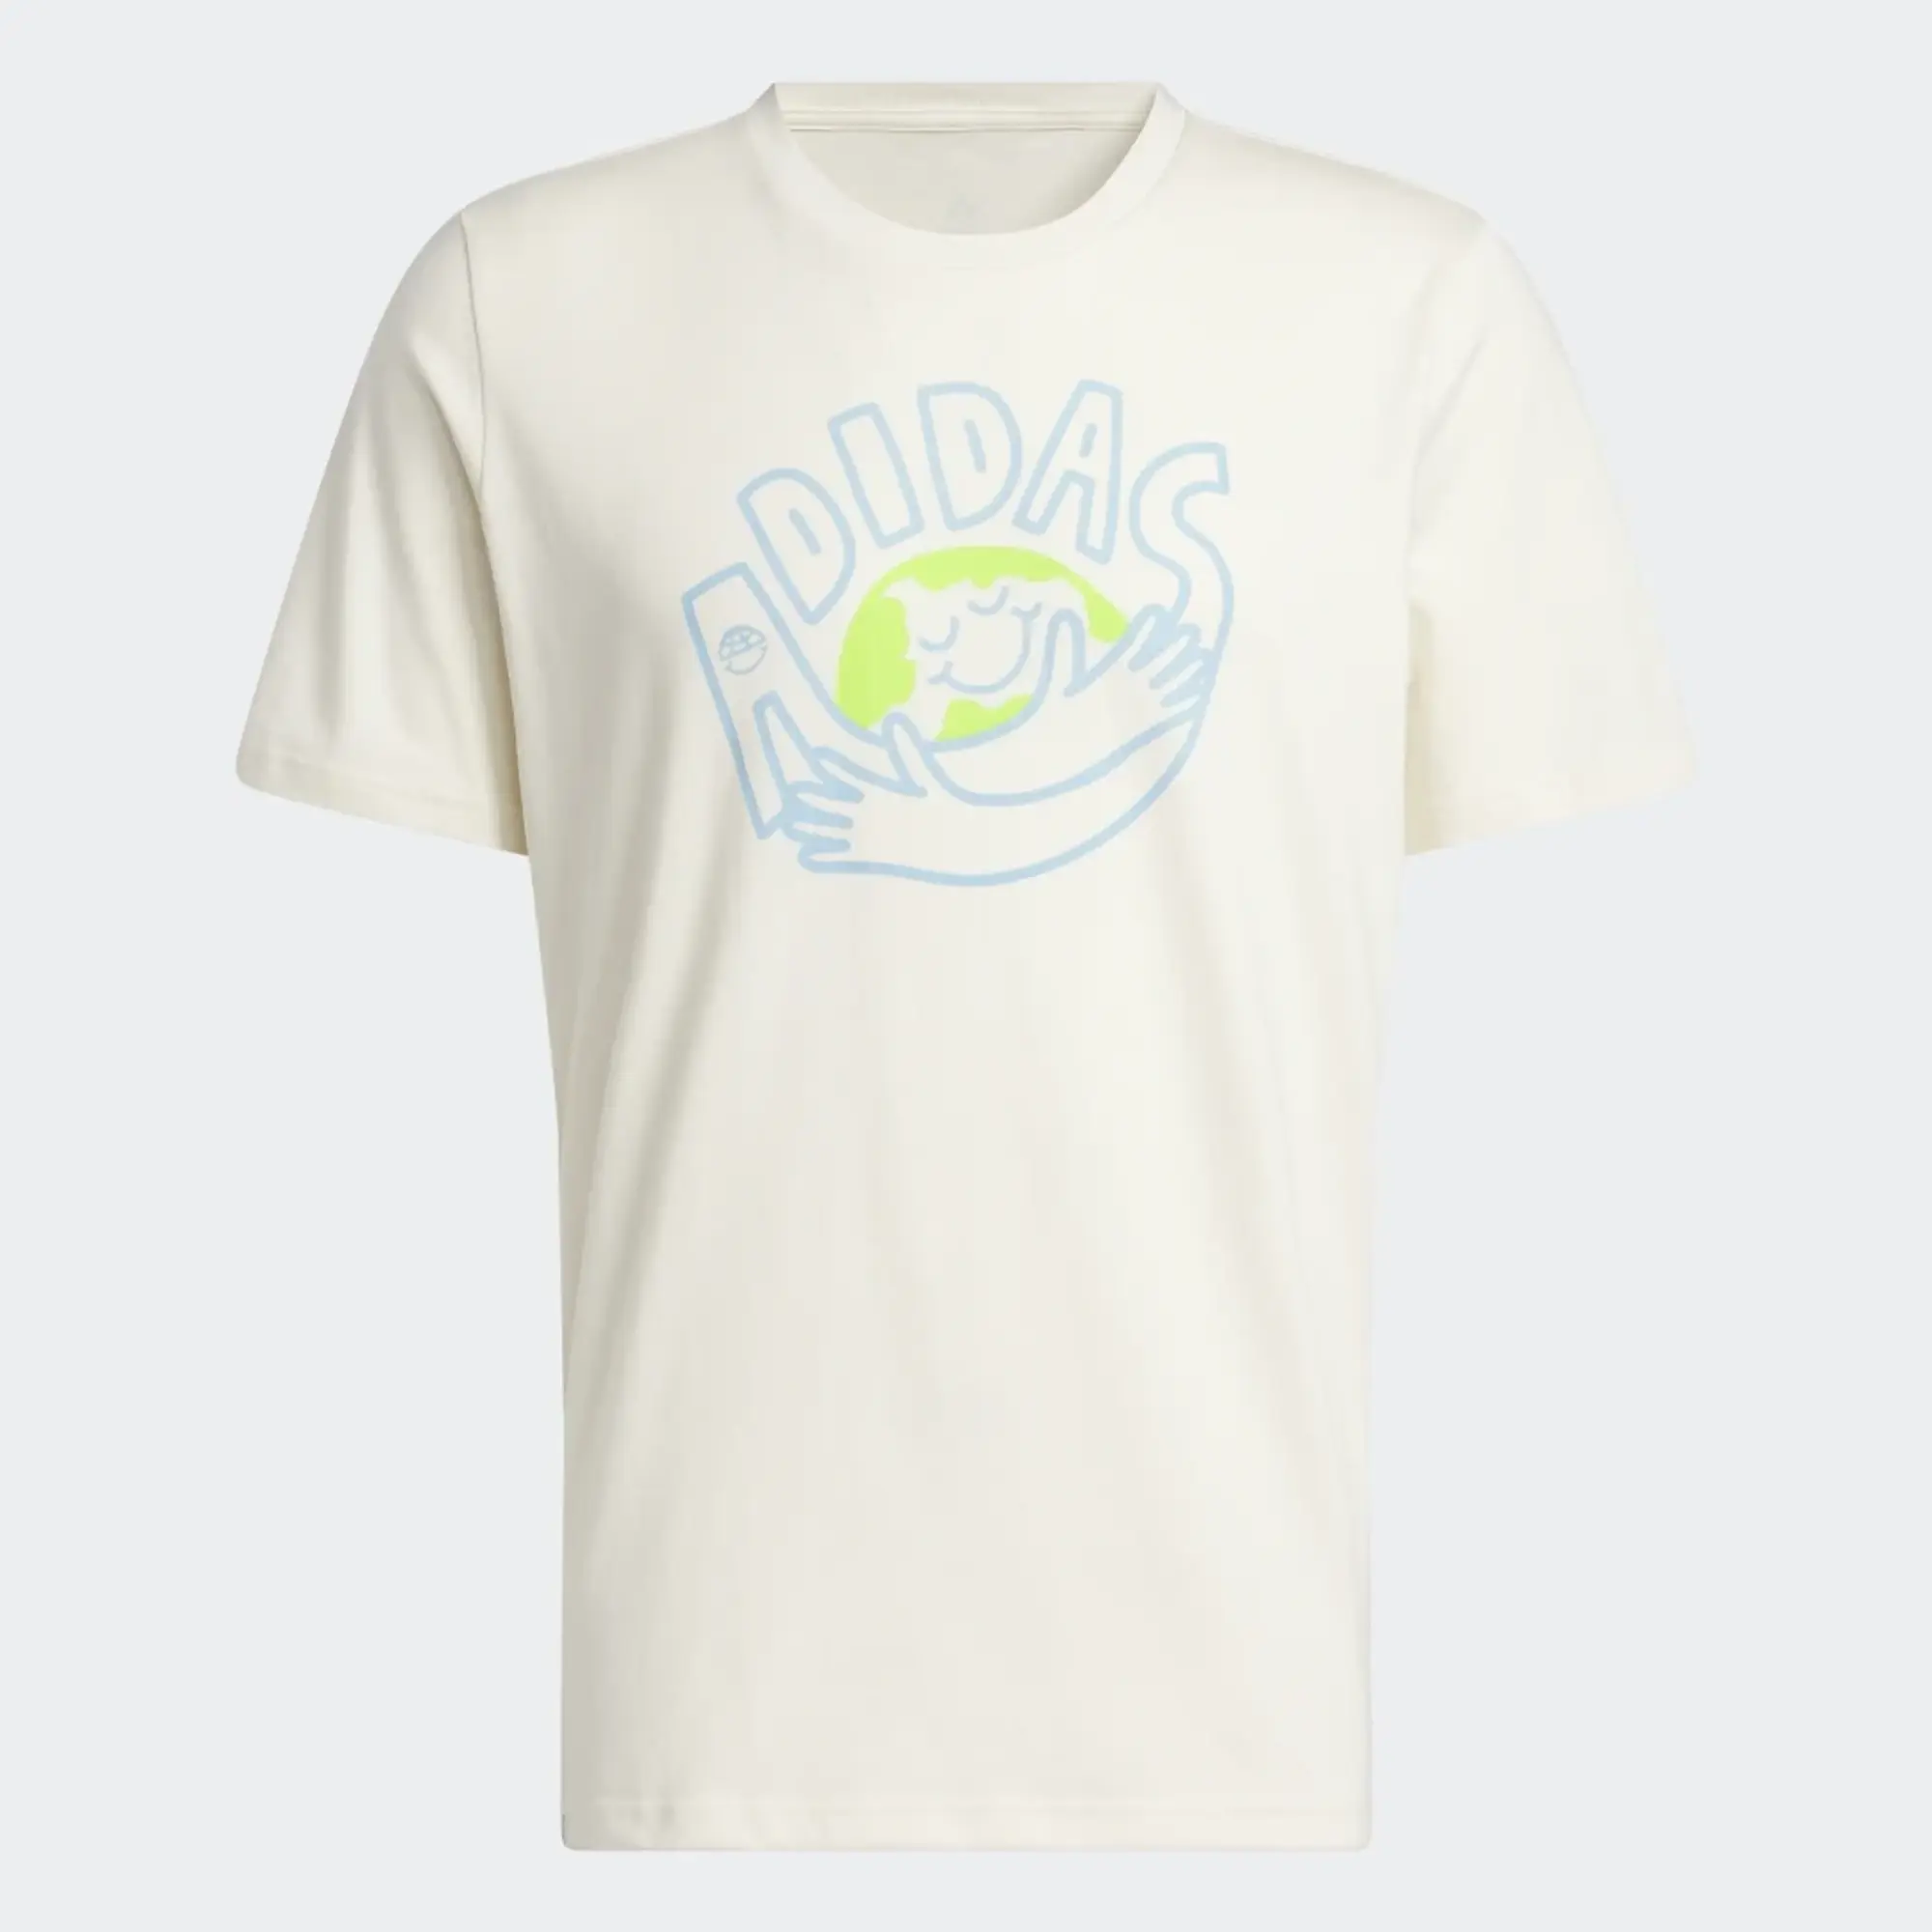 adidas Change Through Sports Earth Graphic T-Shirt - Non Dyed